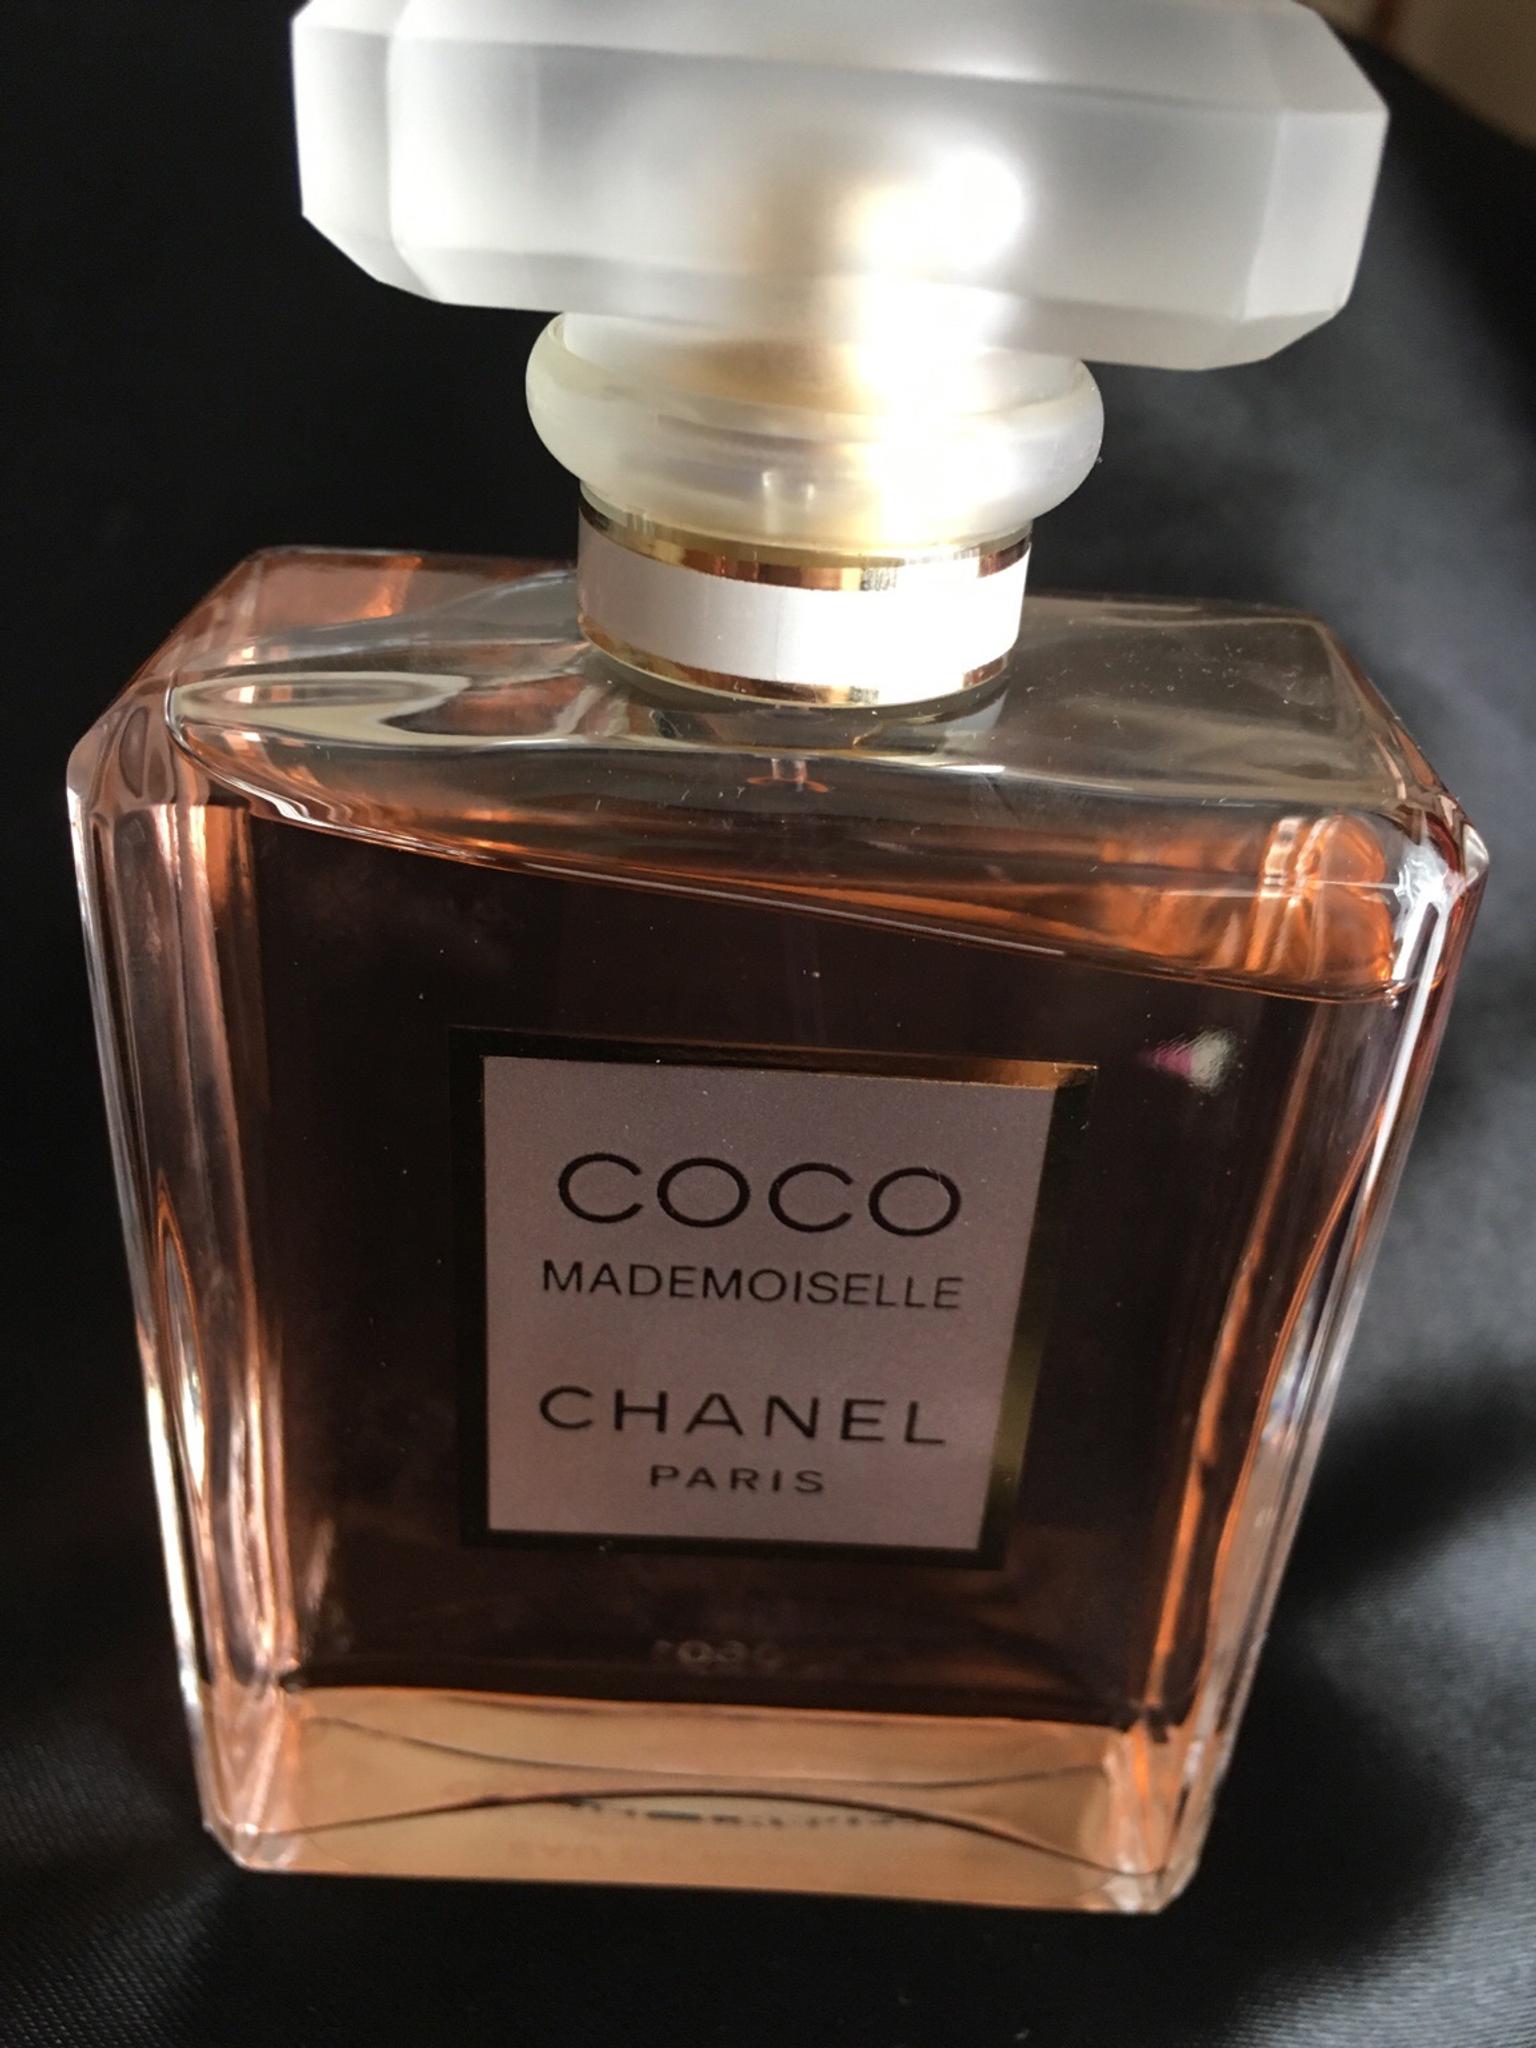 Chanel COCO Mademoiselle Perfume 100ml in UB5 Northolt for